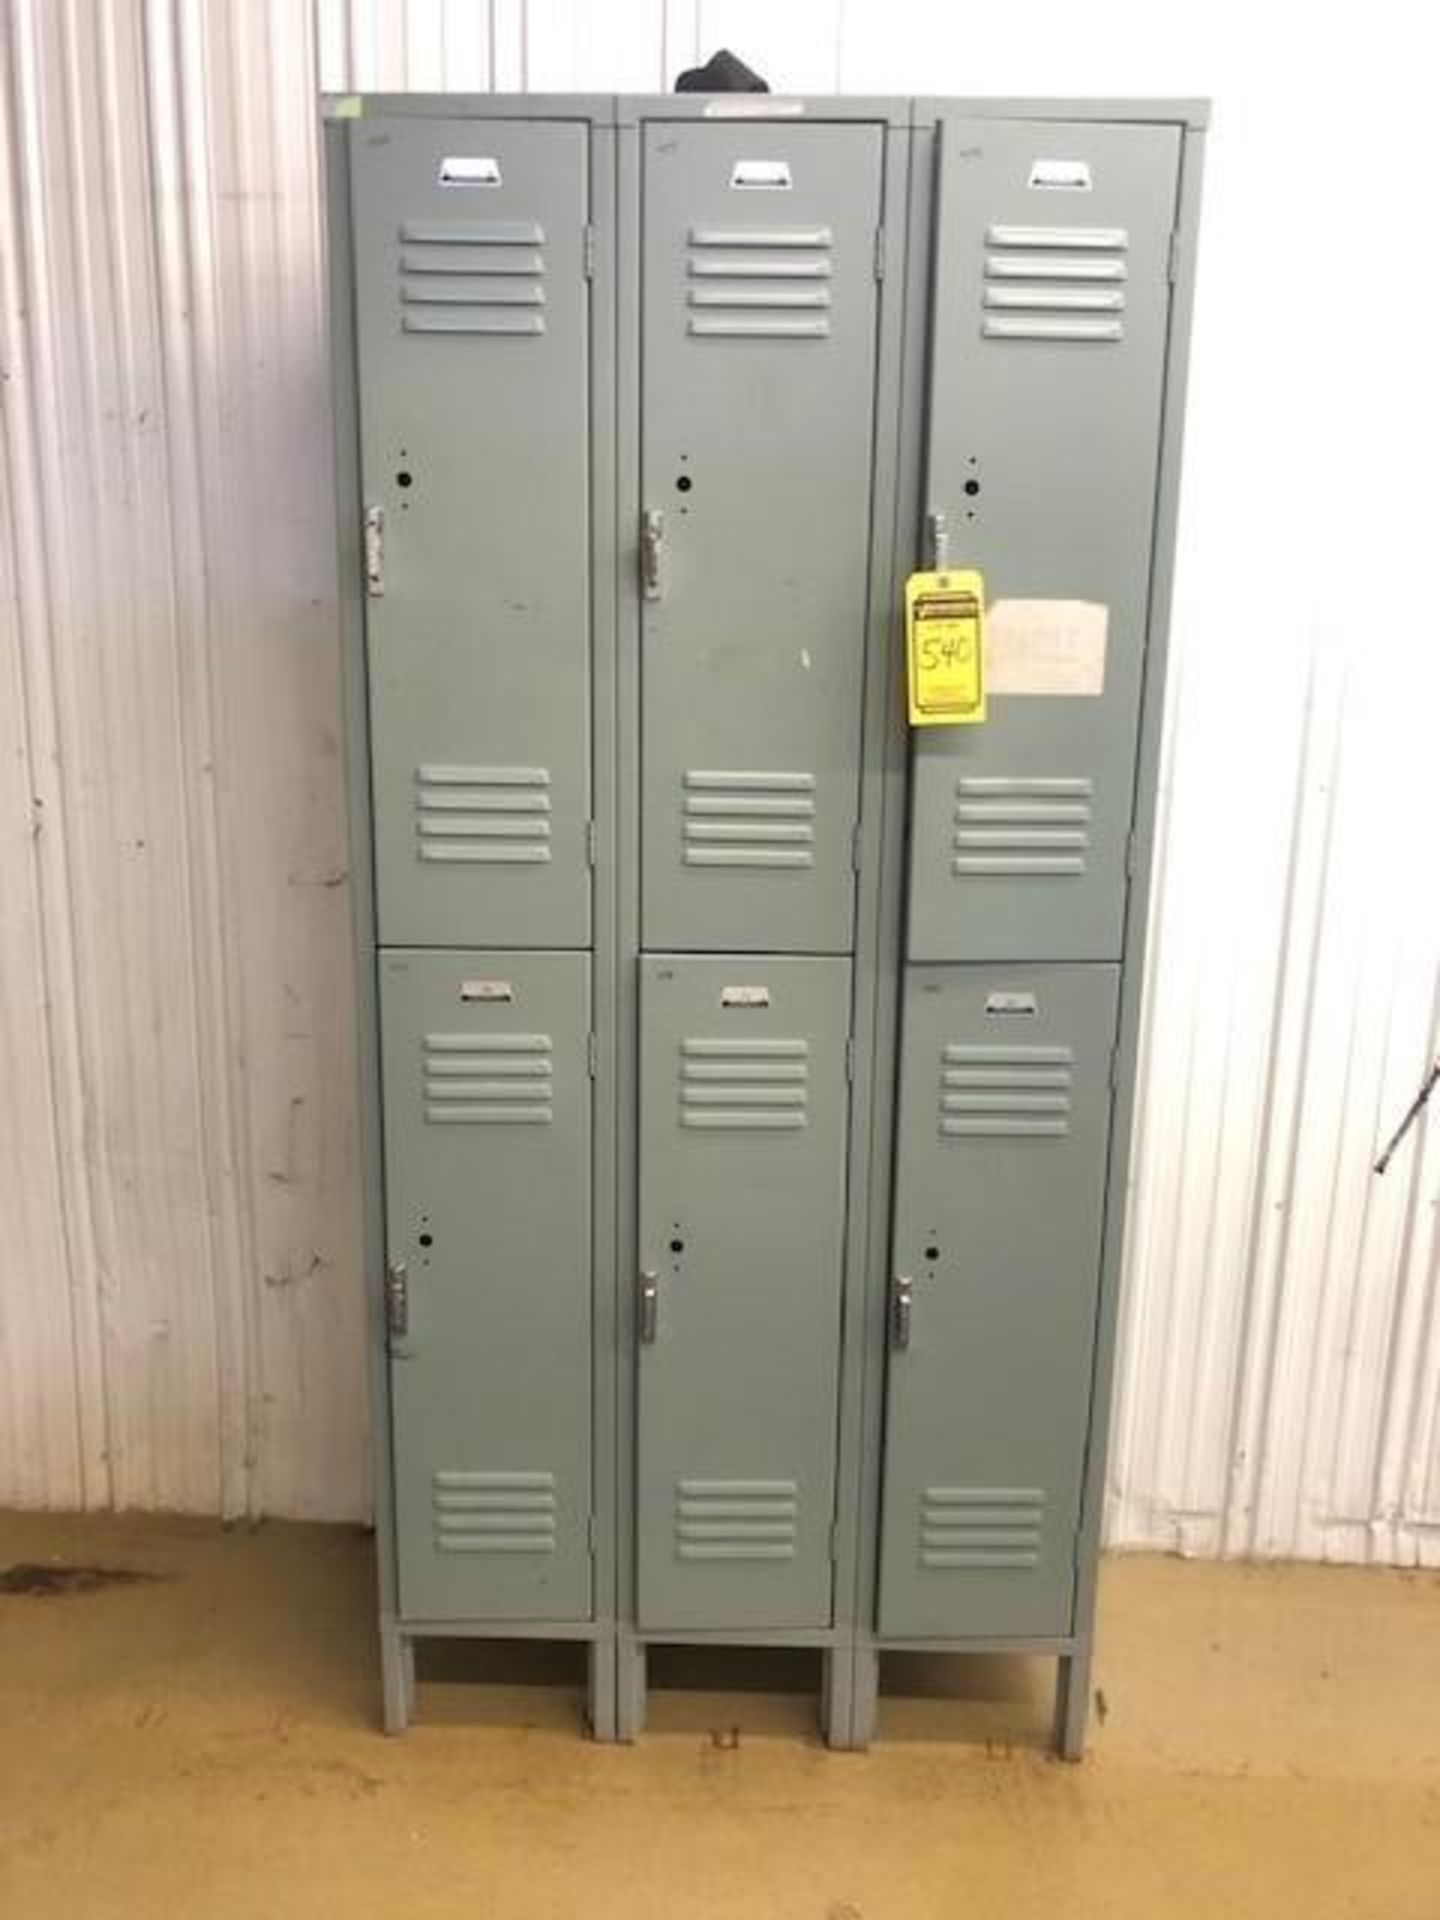 (4) SECTIONS OF LOCKERS